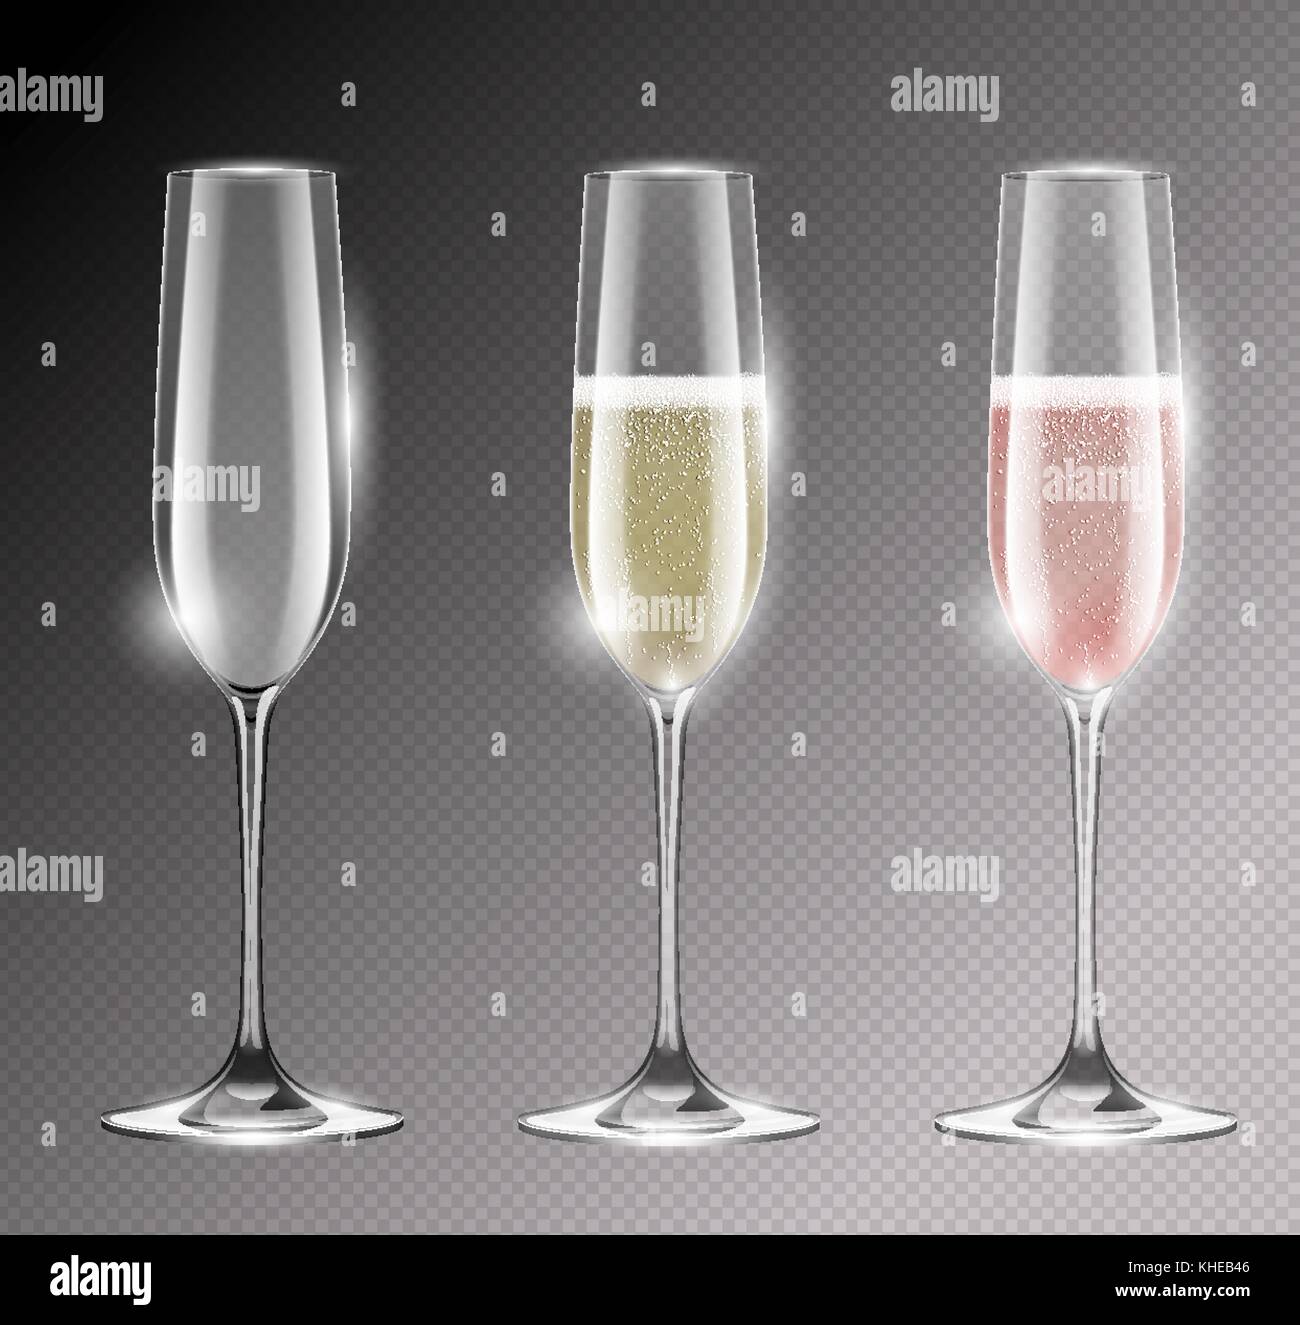 Transparent champagne glass flute vector illustration. Realistic set of glasses with sparkling white and rose wine and empty glass. Empty goblet Stock Vector